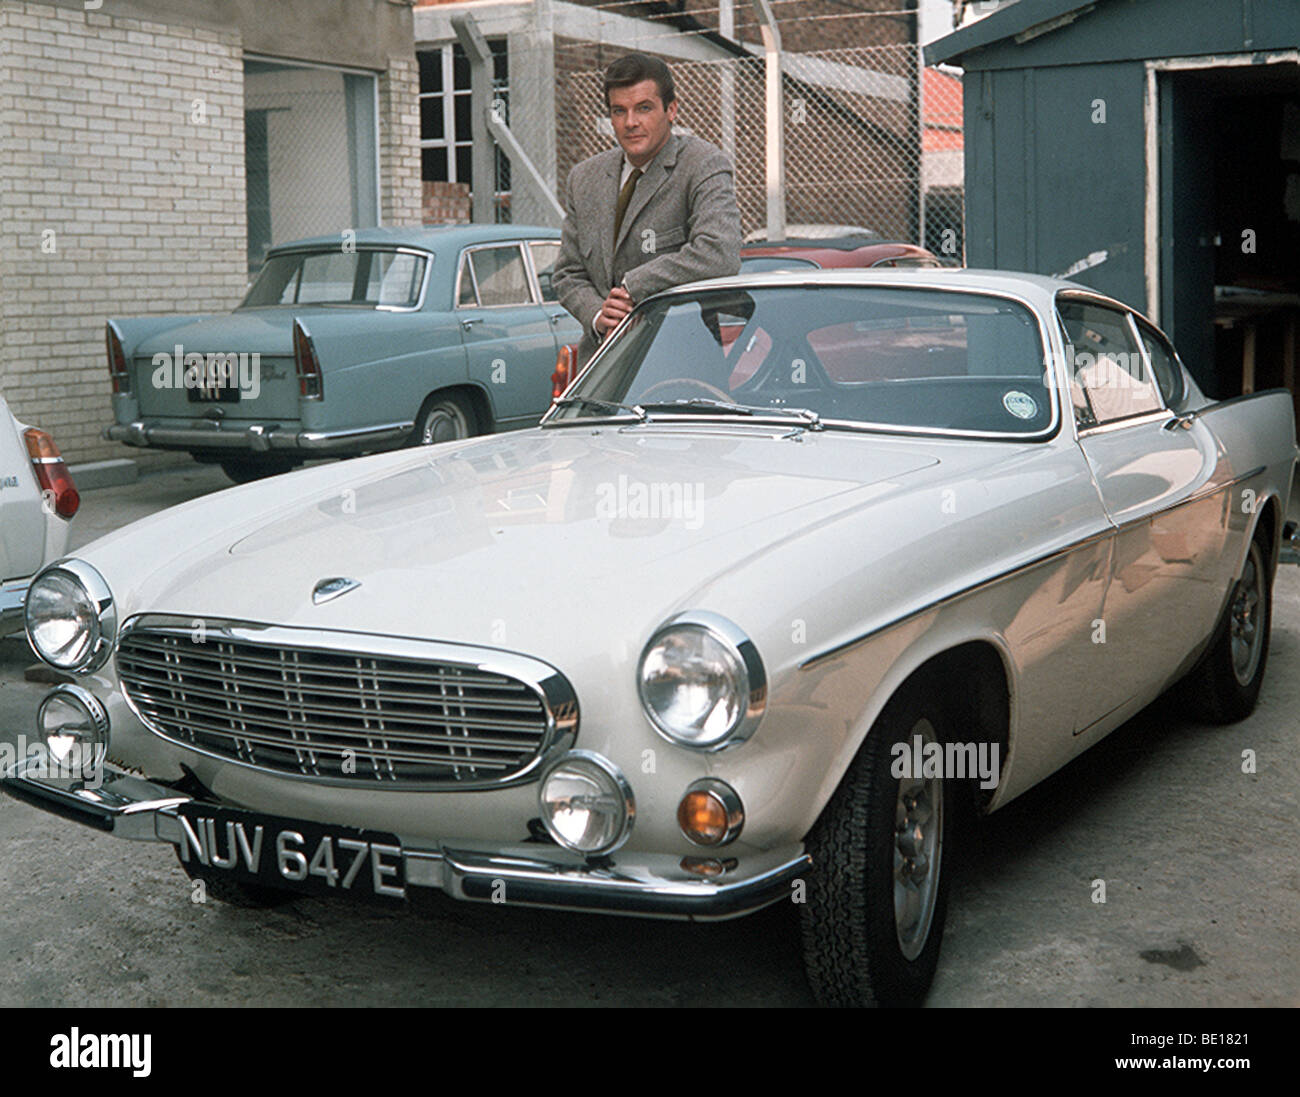 THE SAINT - UK TV series with Roger Moore seen here on the Elstree Studios back lot with the white Volvo P1800 used in the show Stock Photo